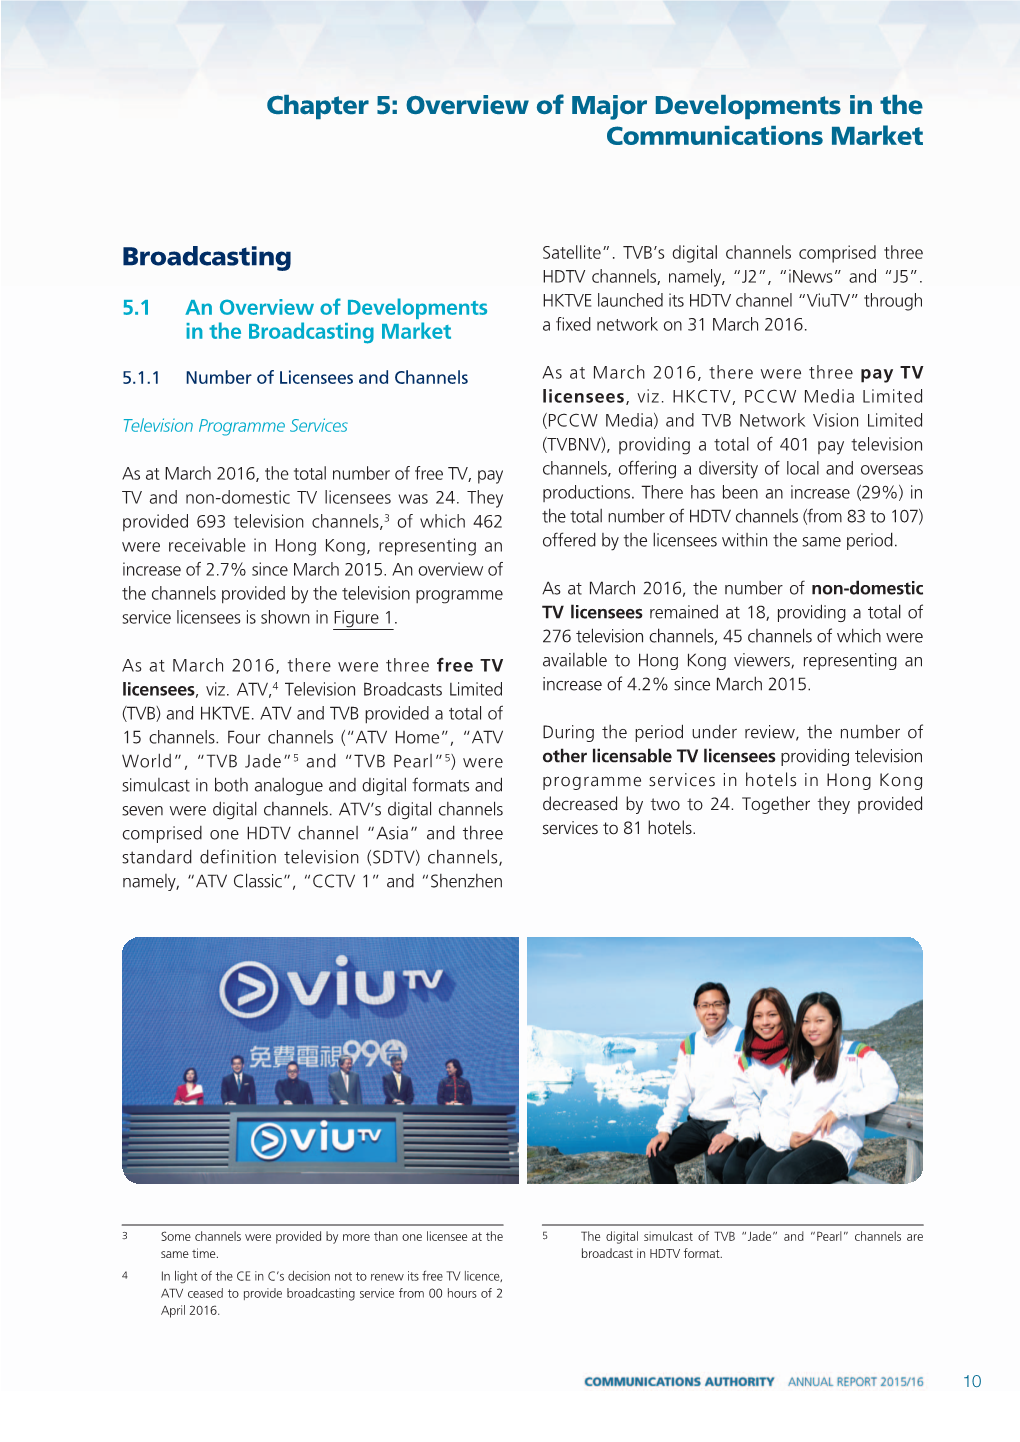 COMMUNICATIONS AUTHORITY ANNUAL REPORT 2015/16 14 Investment in Broadcasting Industry Included Acquisition of Premium Programming and Content Production